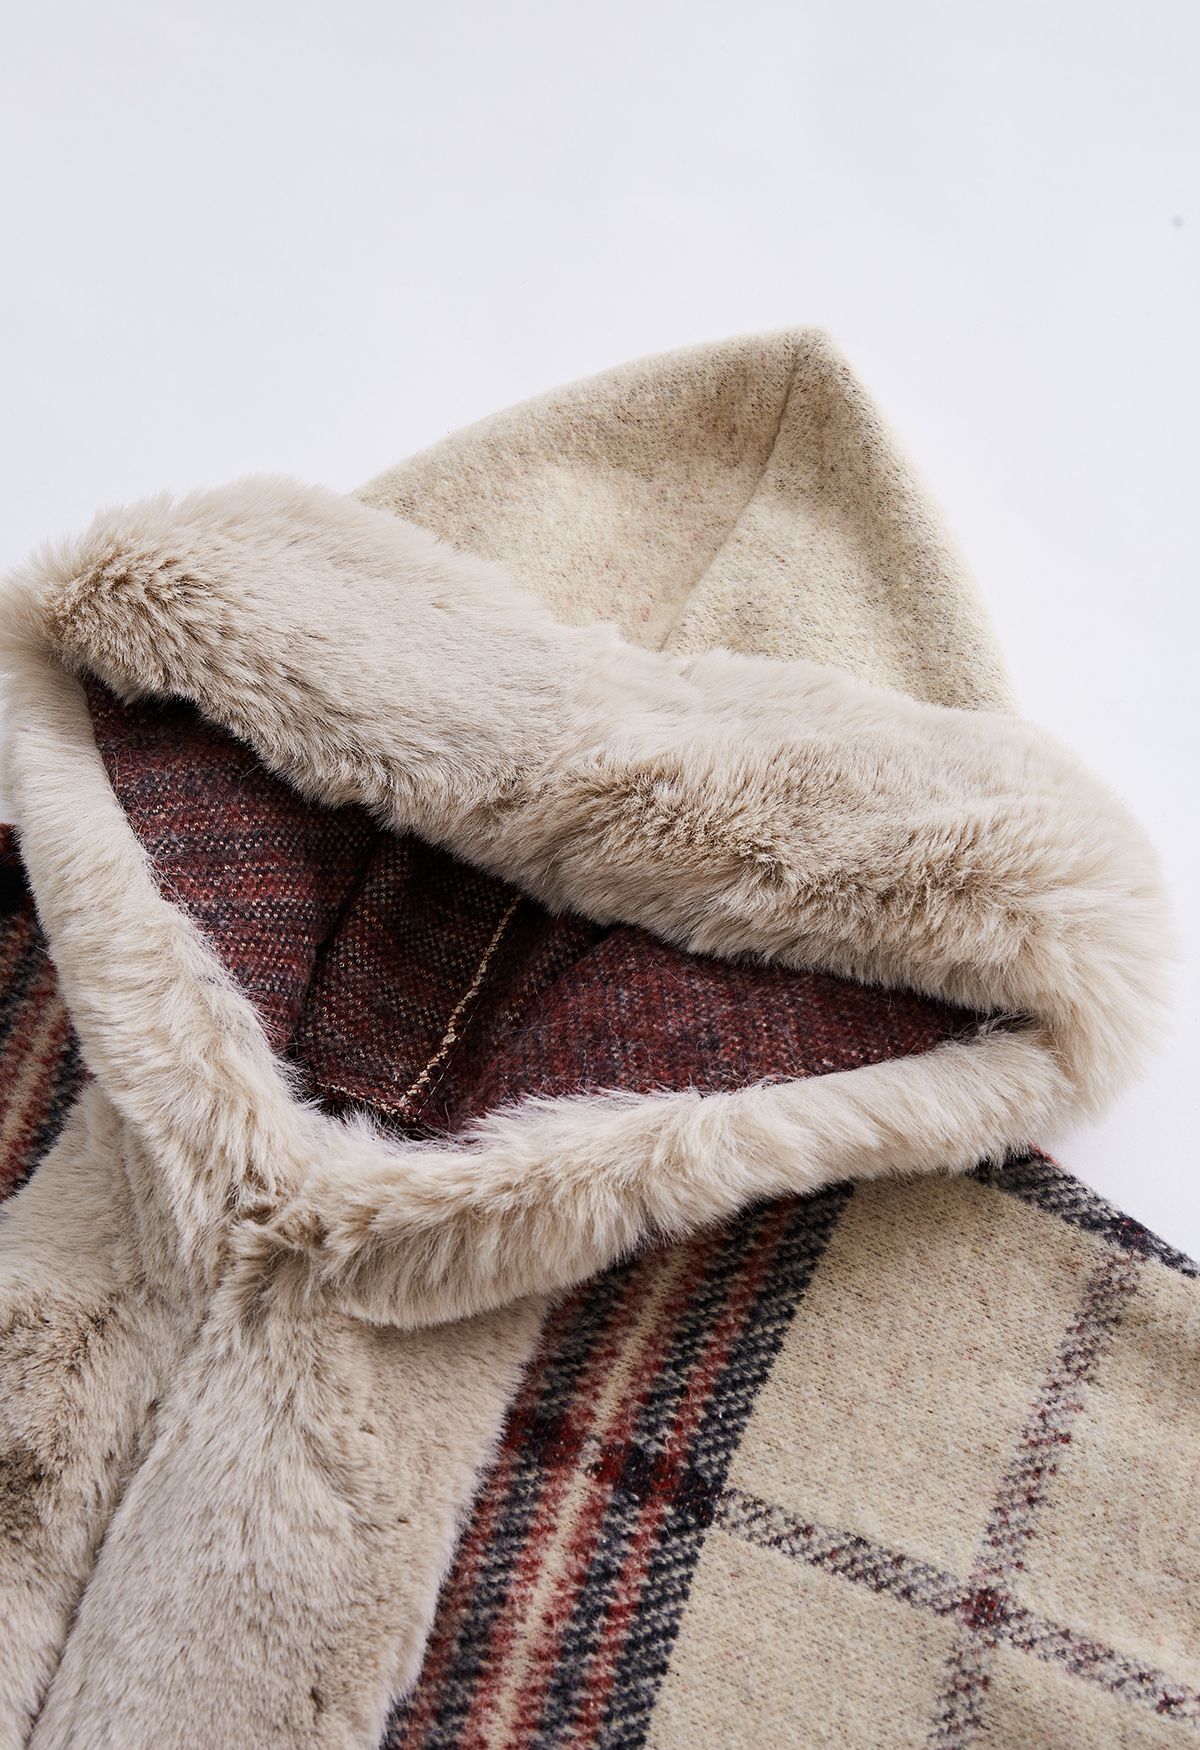 Plaid Fringe Faux Fur Hooded Poncho in Camel